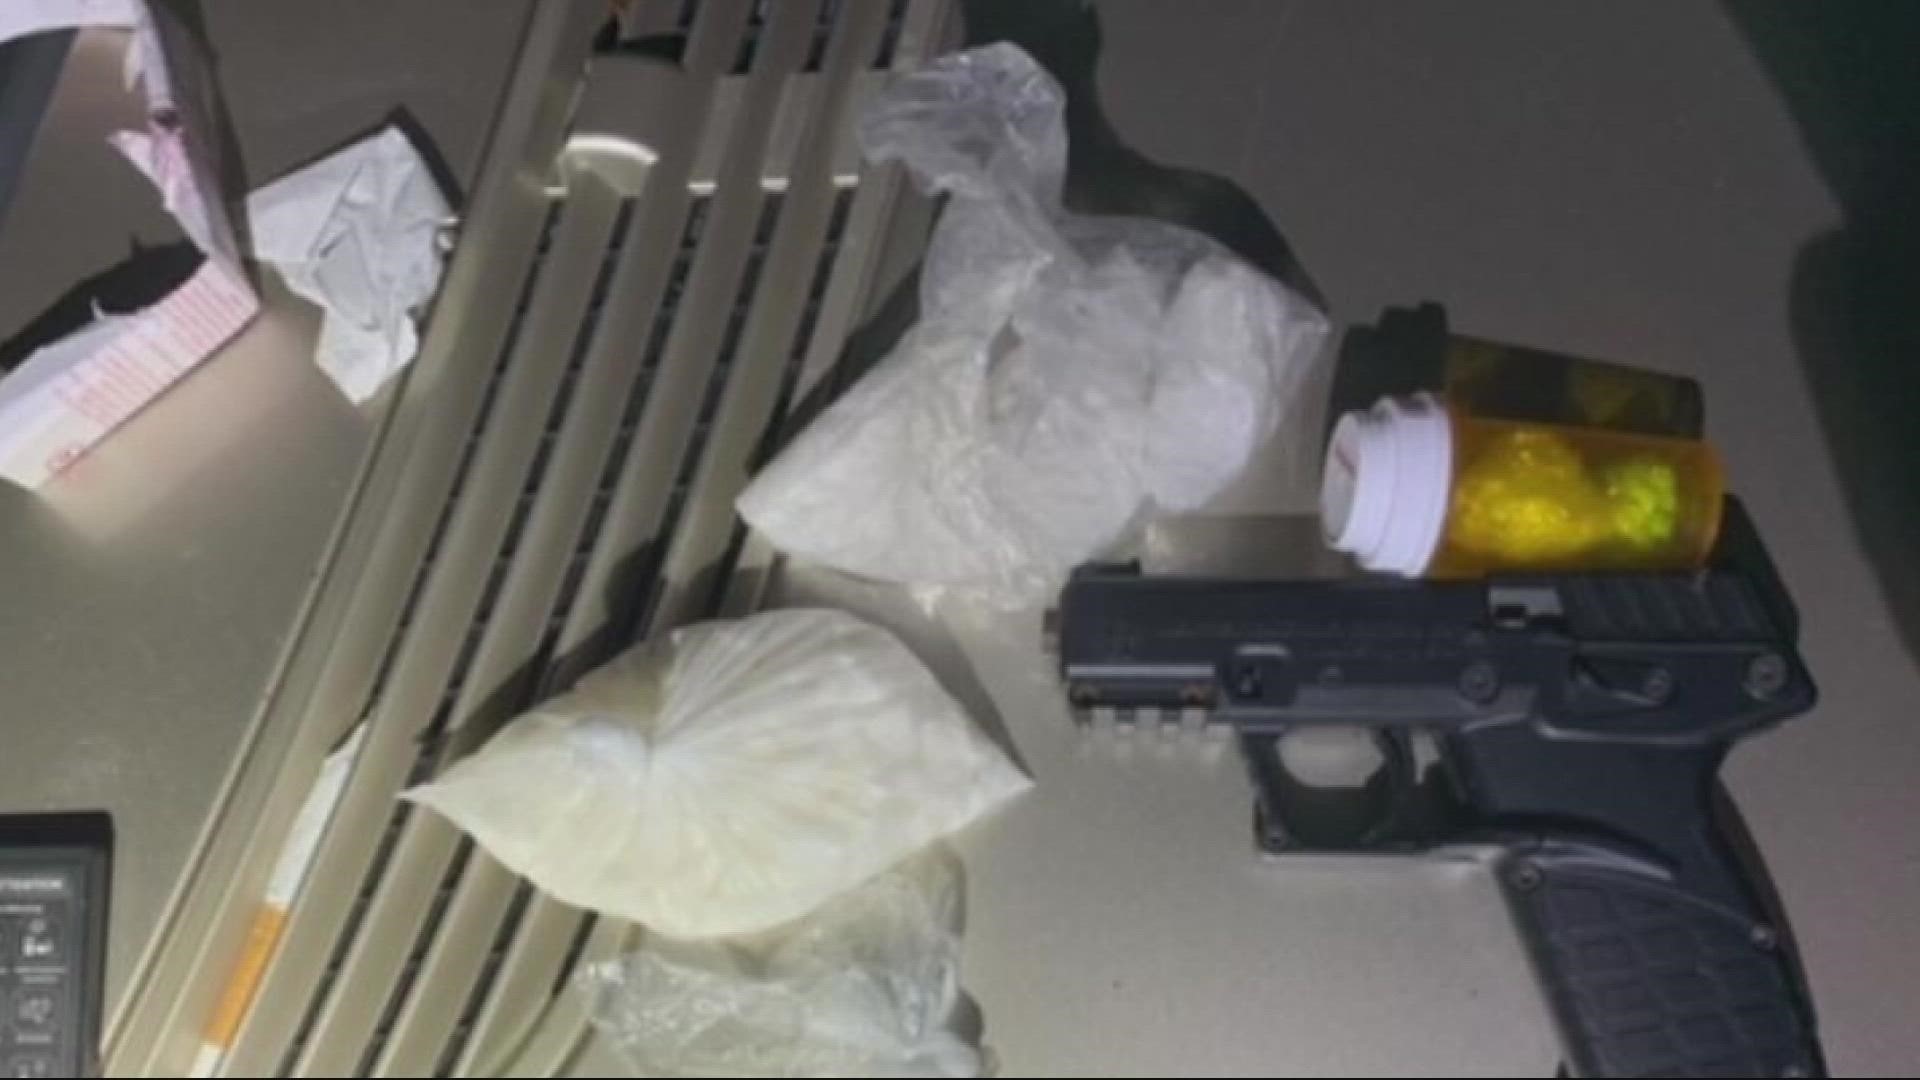 More dangerous drugs and guns are off the streets of Jacksonville.